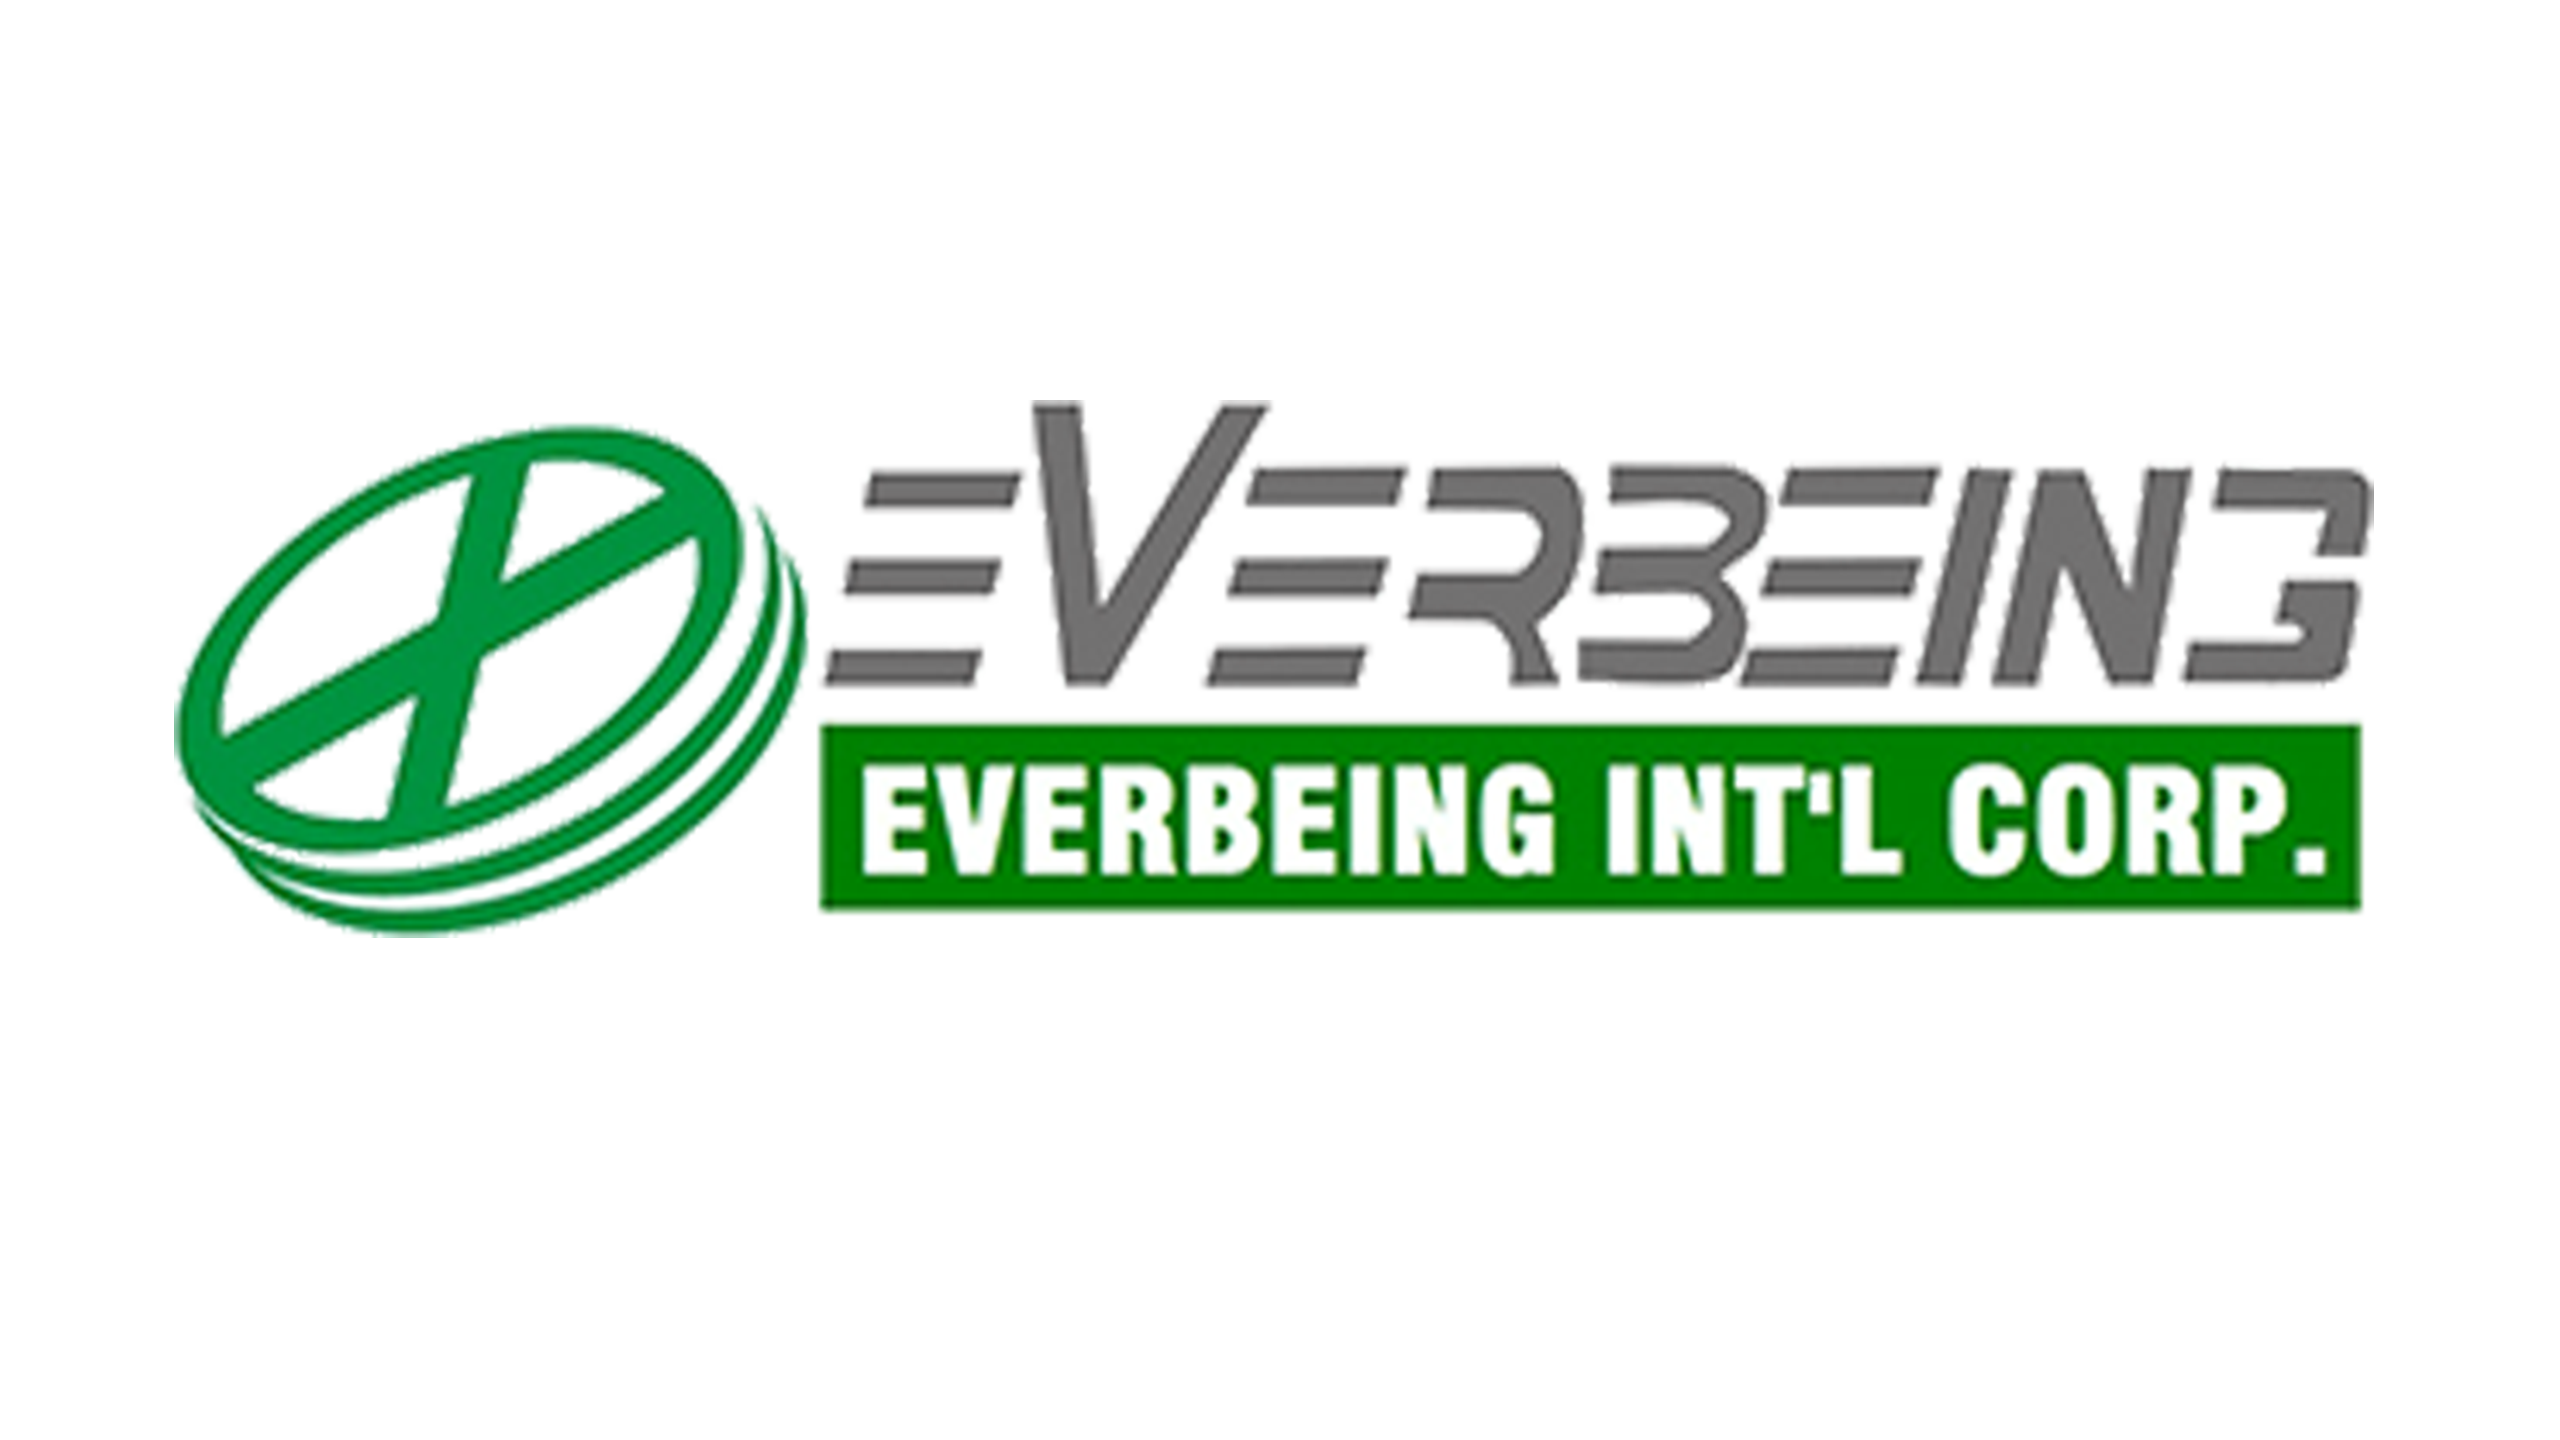 Everbeing Int'l Corp.